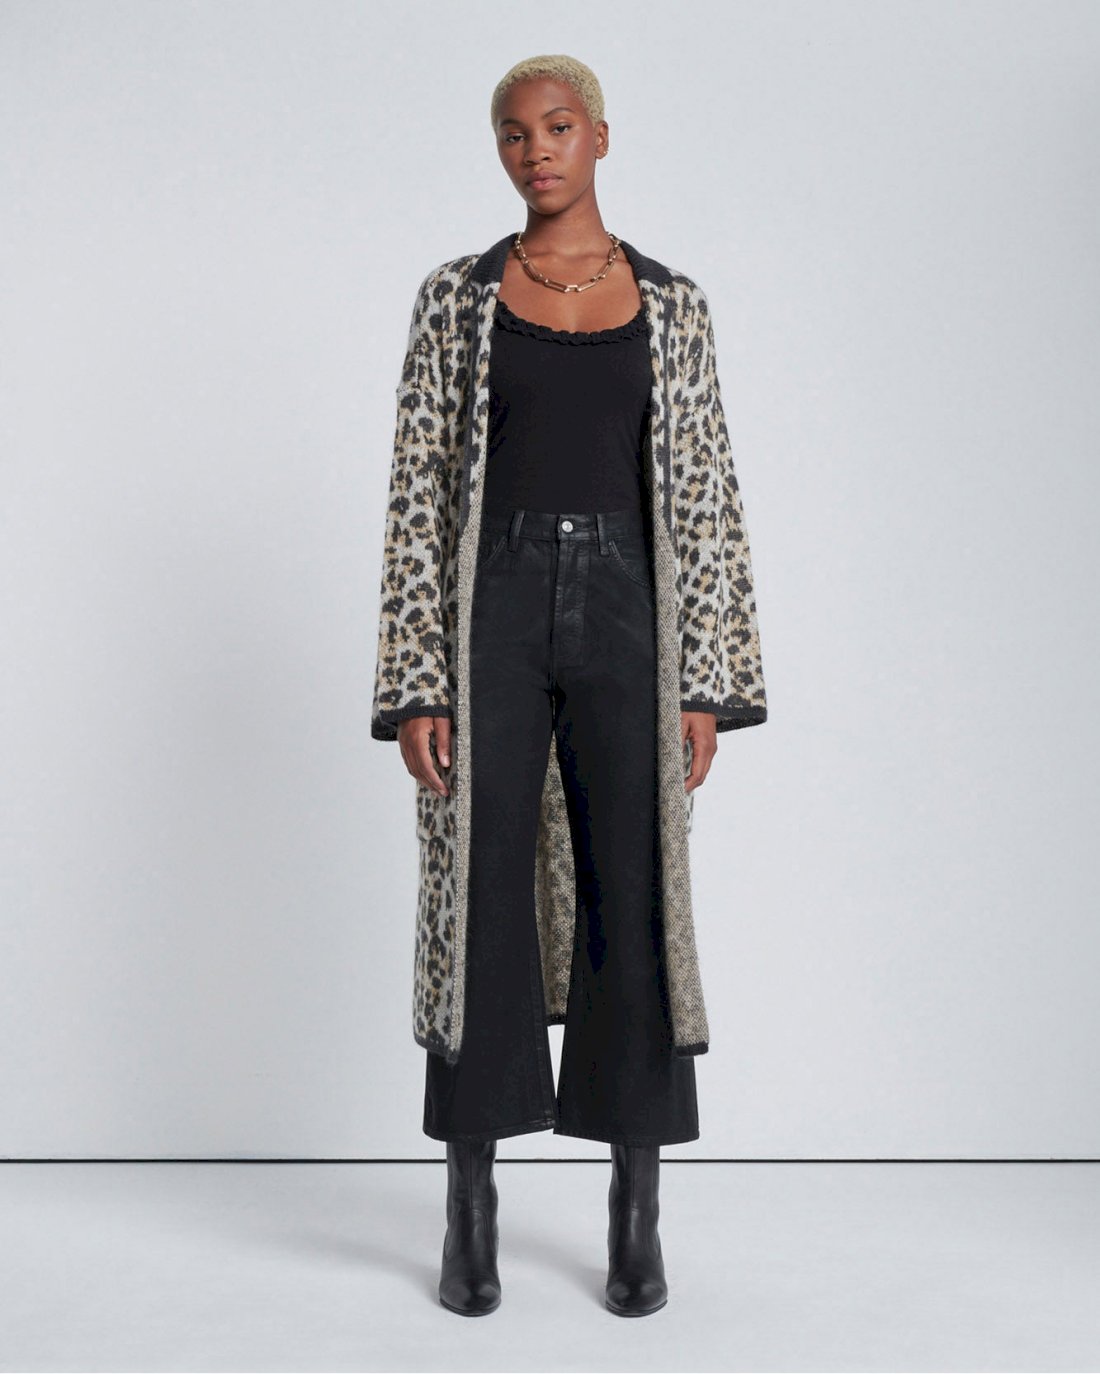 Jacquard Long Sweater Cardigan in Leopard | 7 For All Mankind